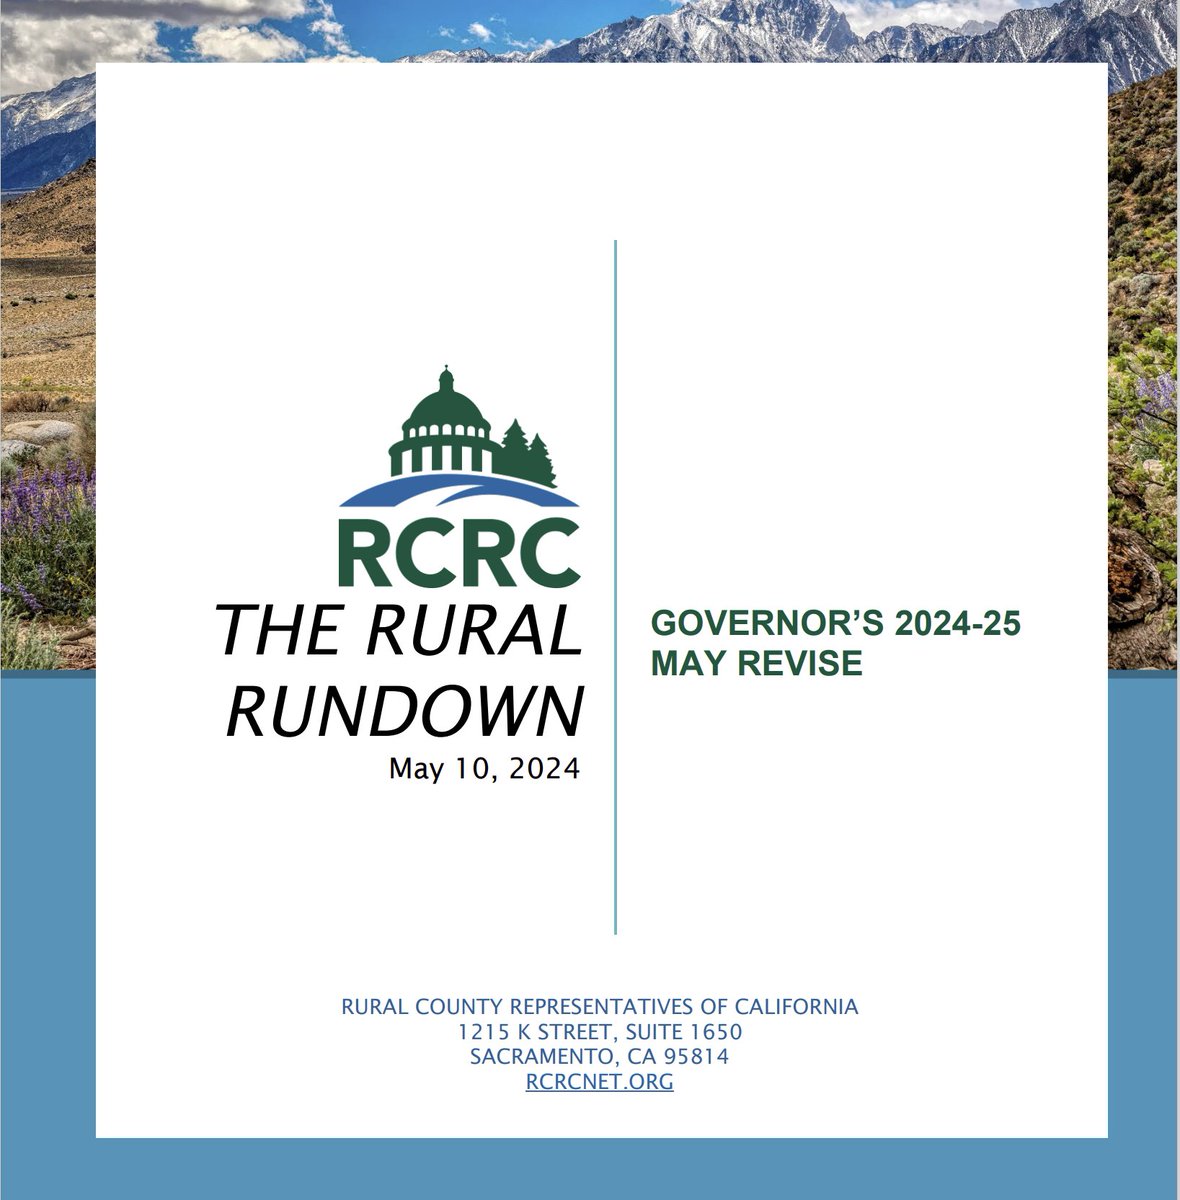 RCRC has officially released the Rural Rundown analyzing @CaGovernor’s 2024-25 May Revision of the #CABudget! RCRC breaks down how budget priorities and ensuing deficit may impact #ruralcounties and residents. Read the Rundown here: bit.ly/4aeSLvo